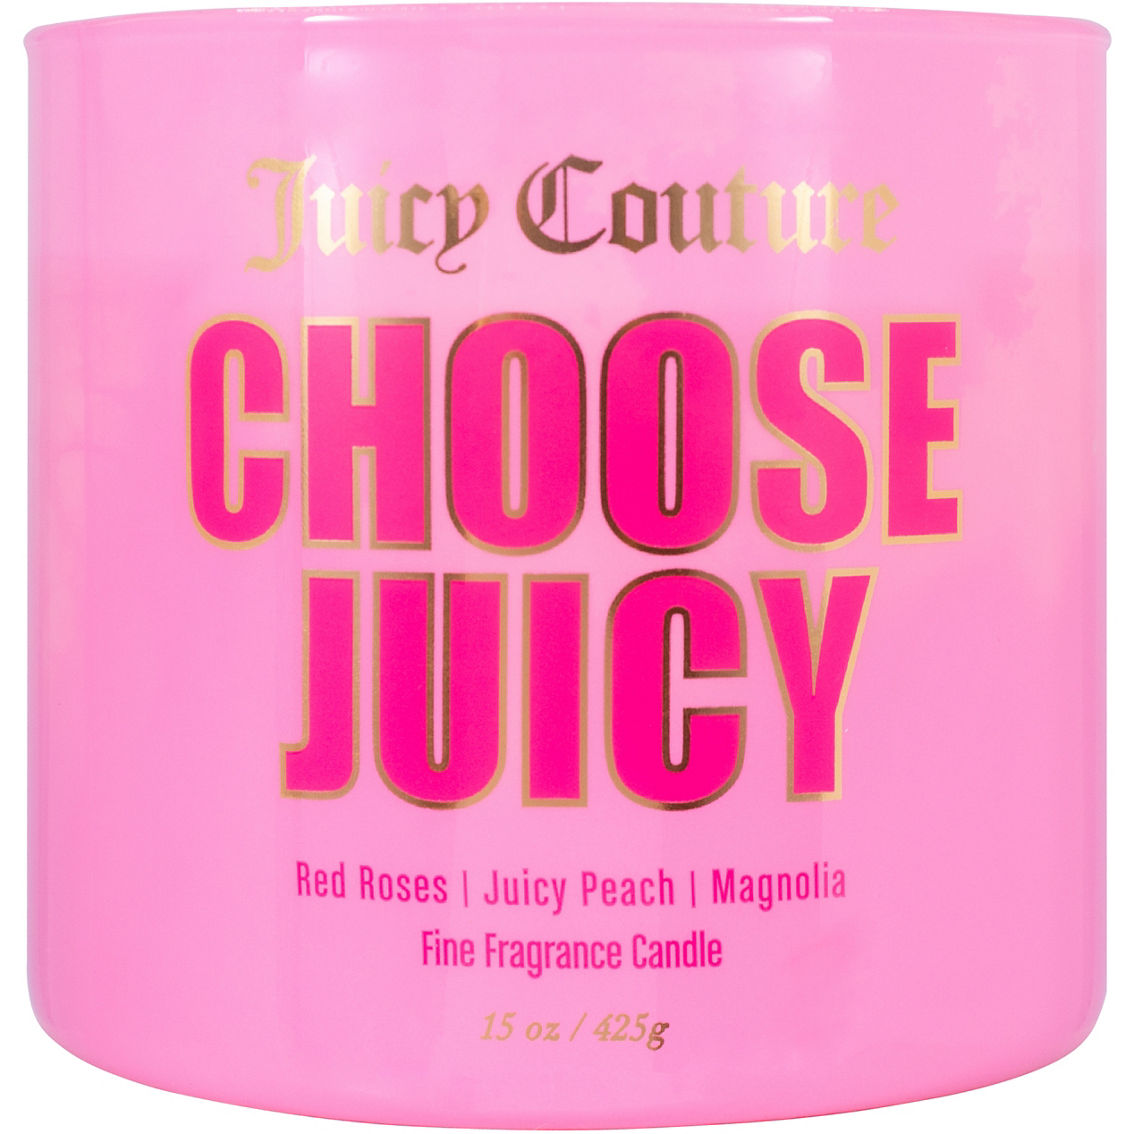 Juicy Couture Choose Juicy 3 Wick Candle - Image 2 of 5